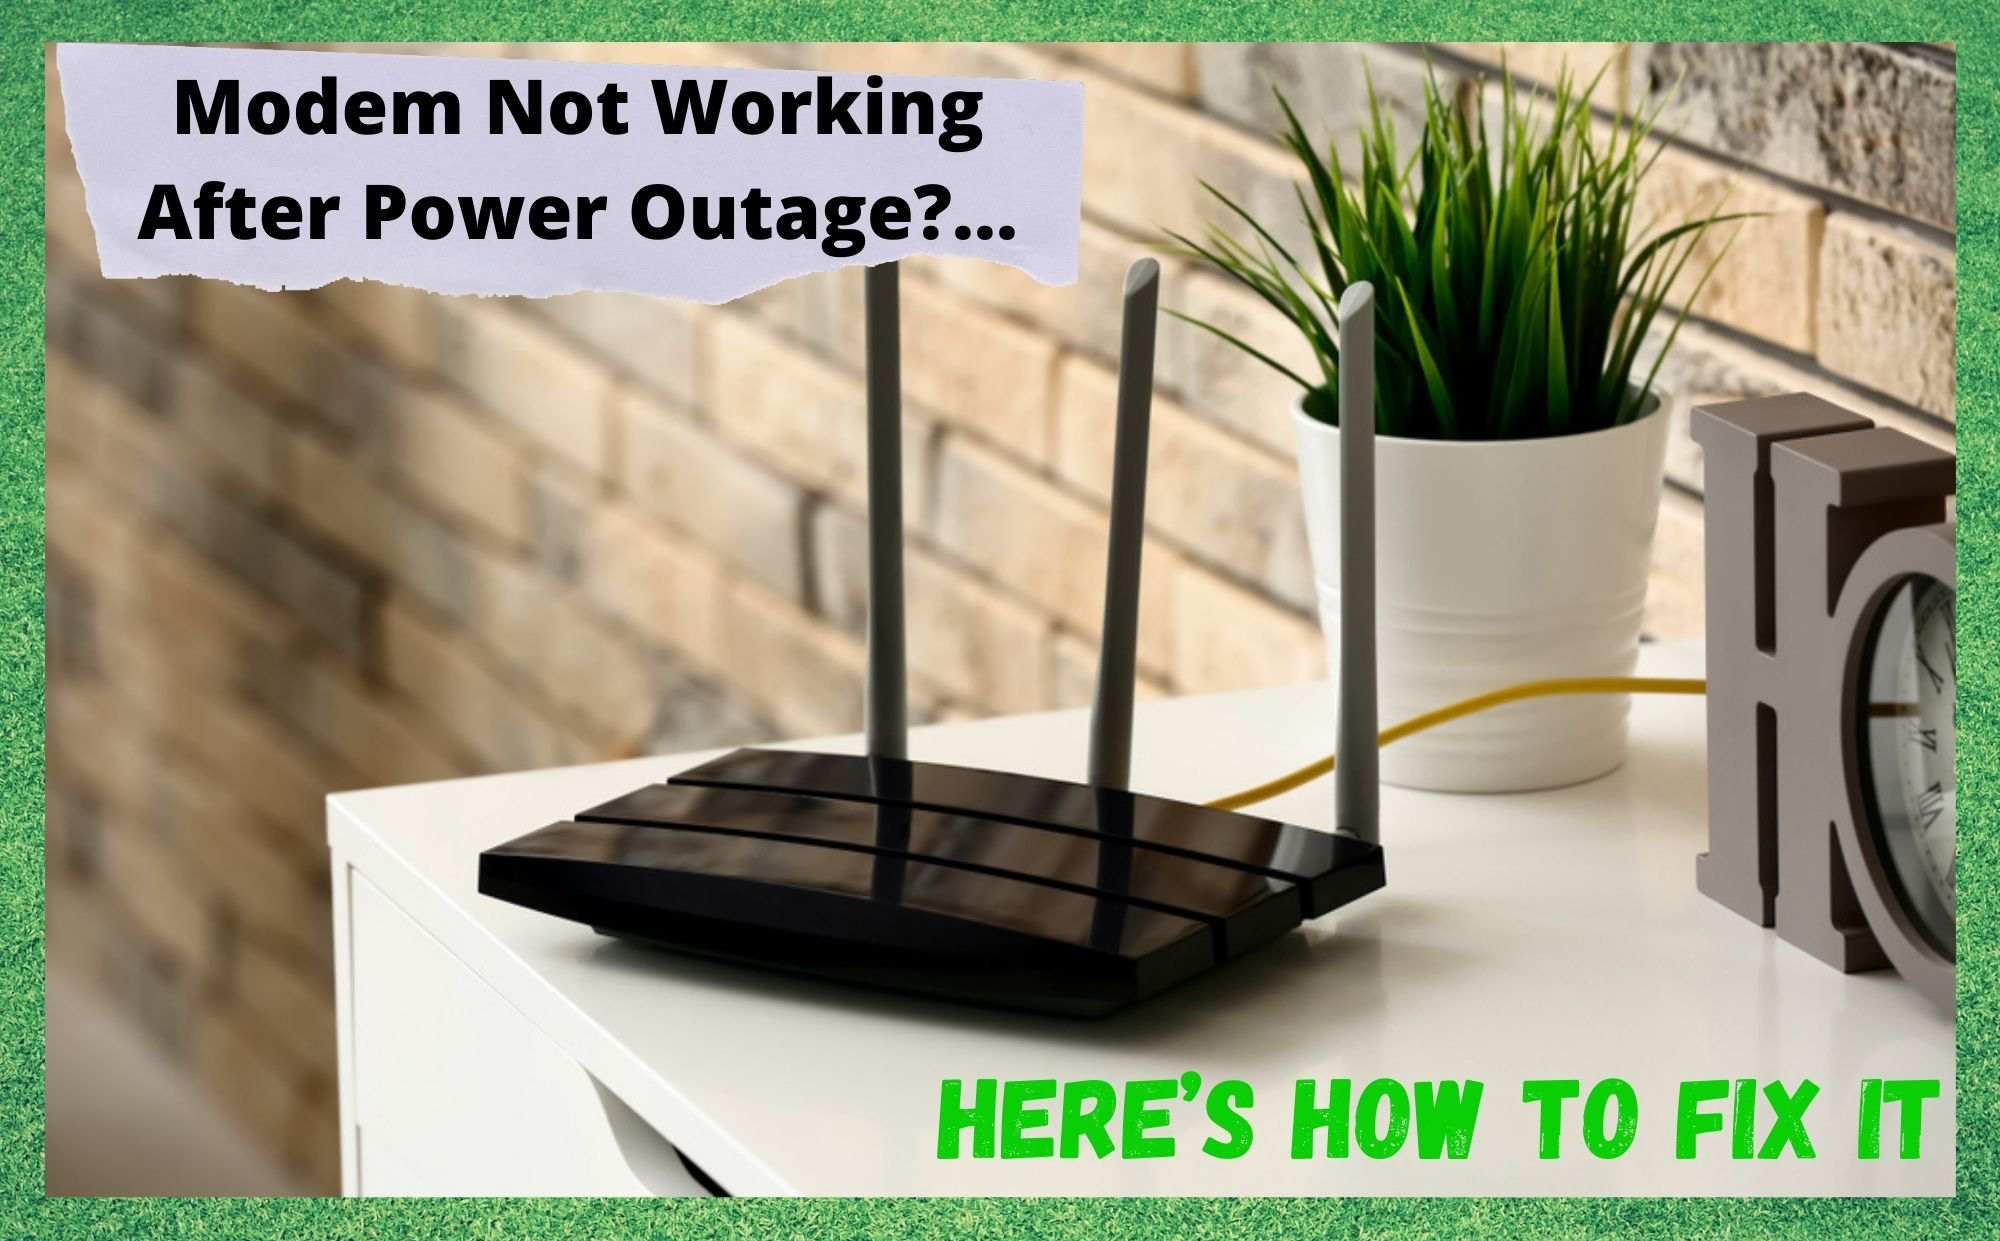 Modem Not Working After Power Outage